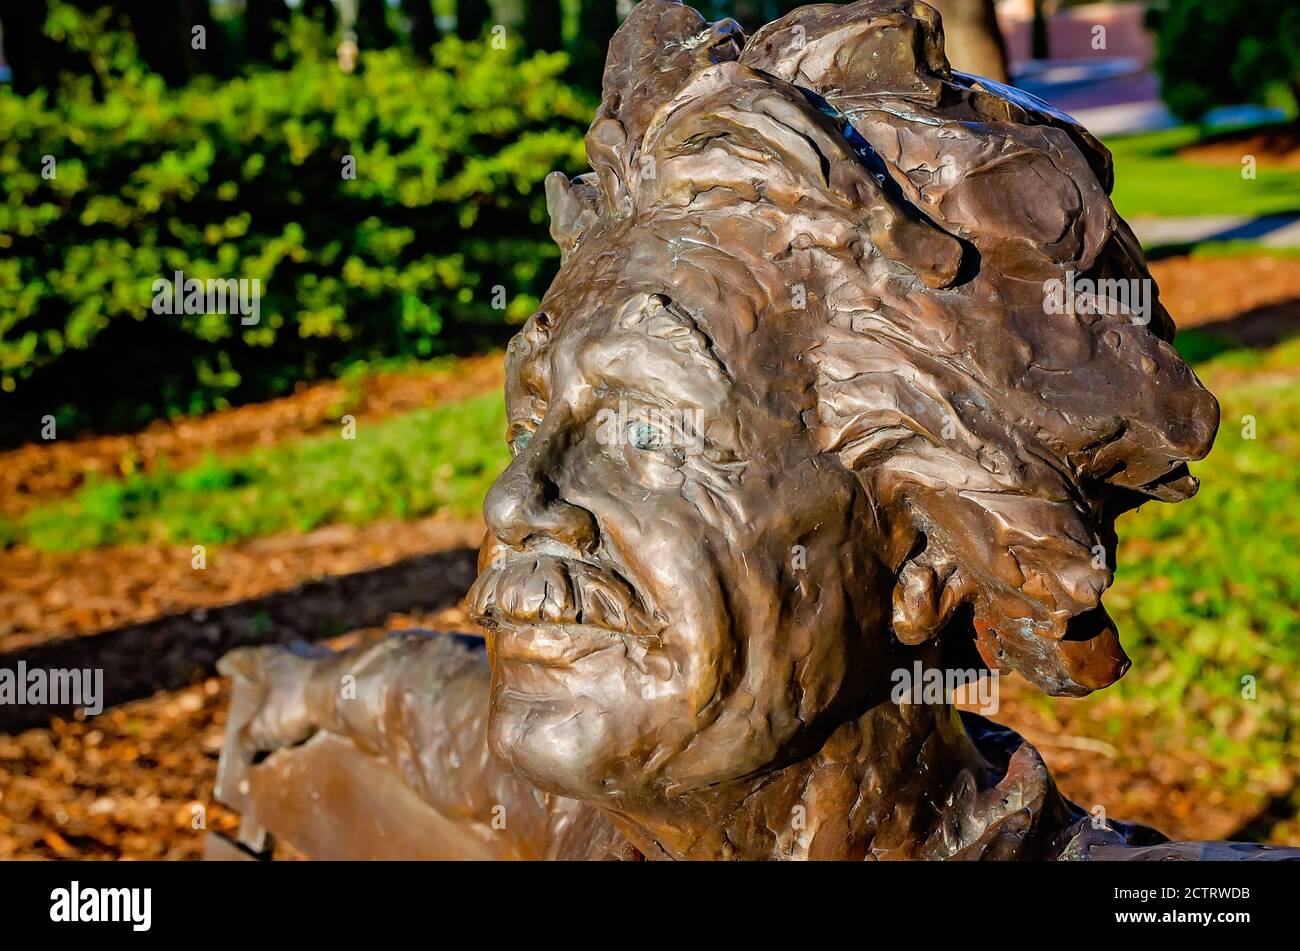 The Einstein bench, a bronze statue of Albert Einstein, is pictured at the University of South Alabama, Aug. 22, 2020, in Mobile, Alabama. Stock Photo